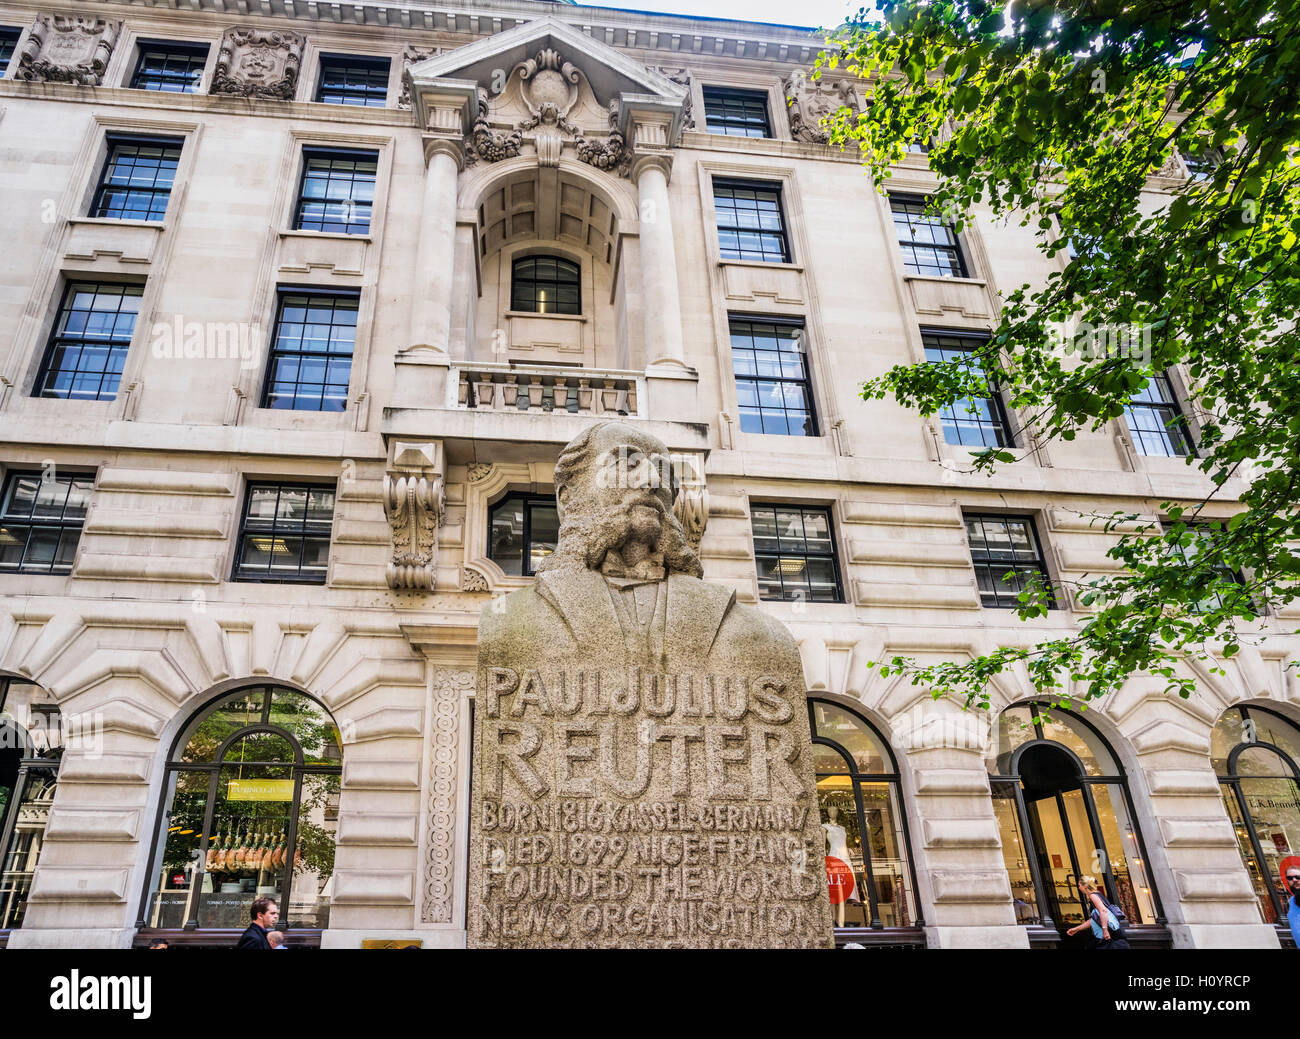 Great Britain, England, City of London, memorial to Paul Julius Reuter, founder of the world news organisation Stock Photo